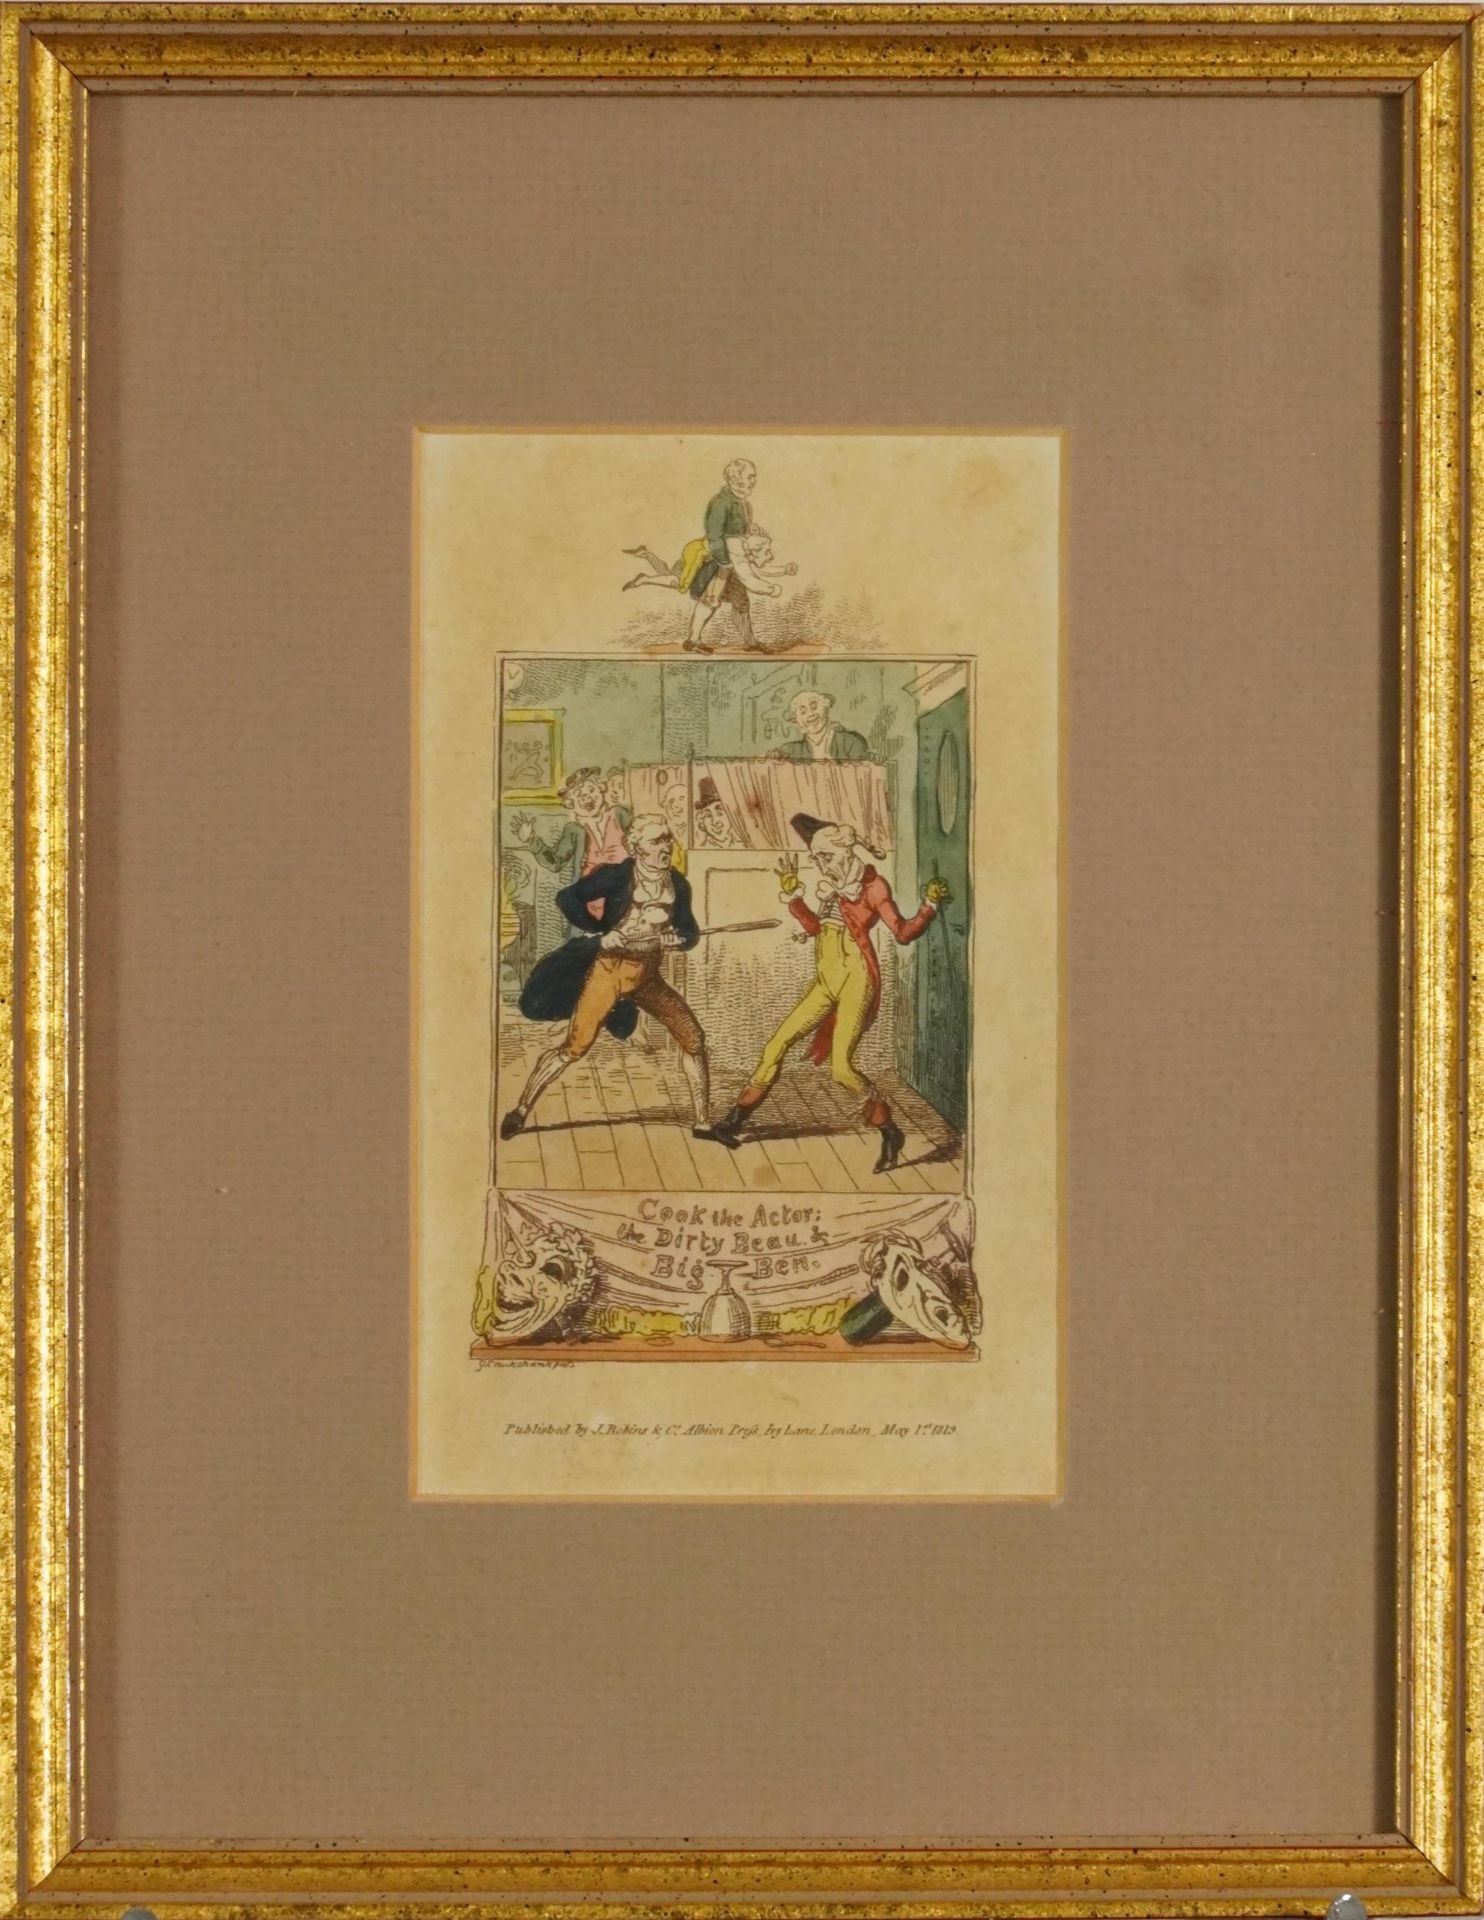 After G Cruikshank - Daniel Lambert and the Dancing Bears and Cook the Actor, pair of early 19th - Image 7 of 9